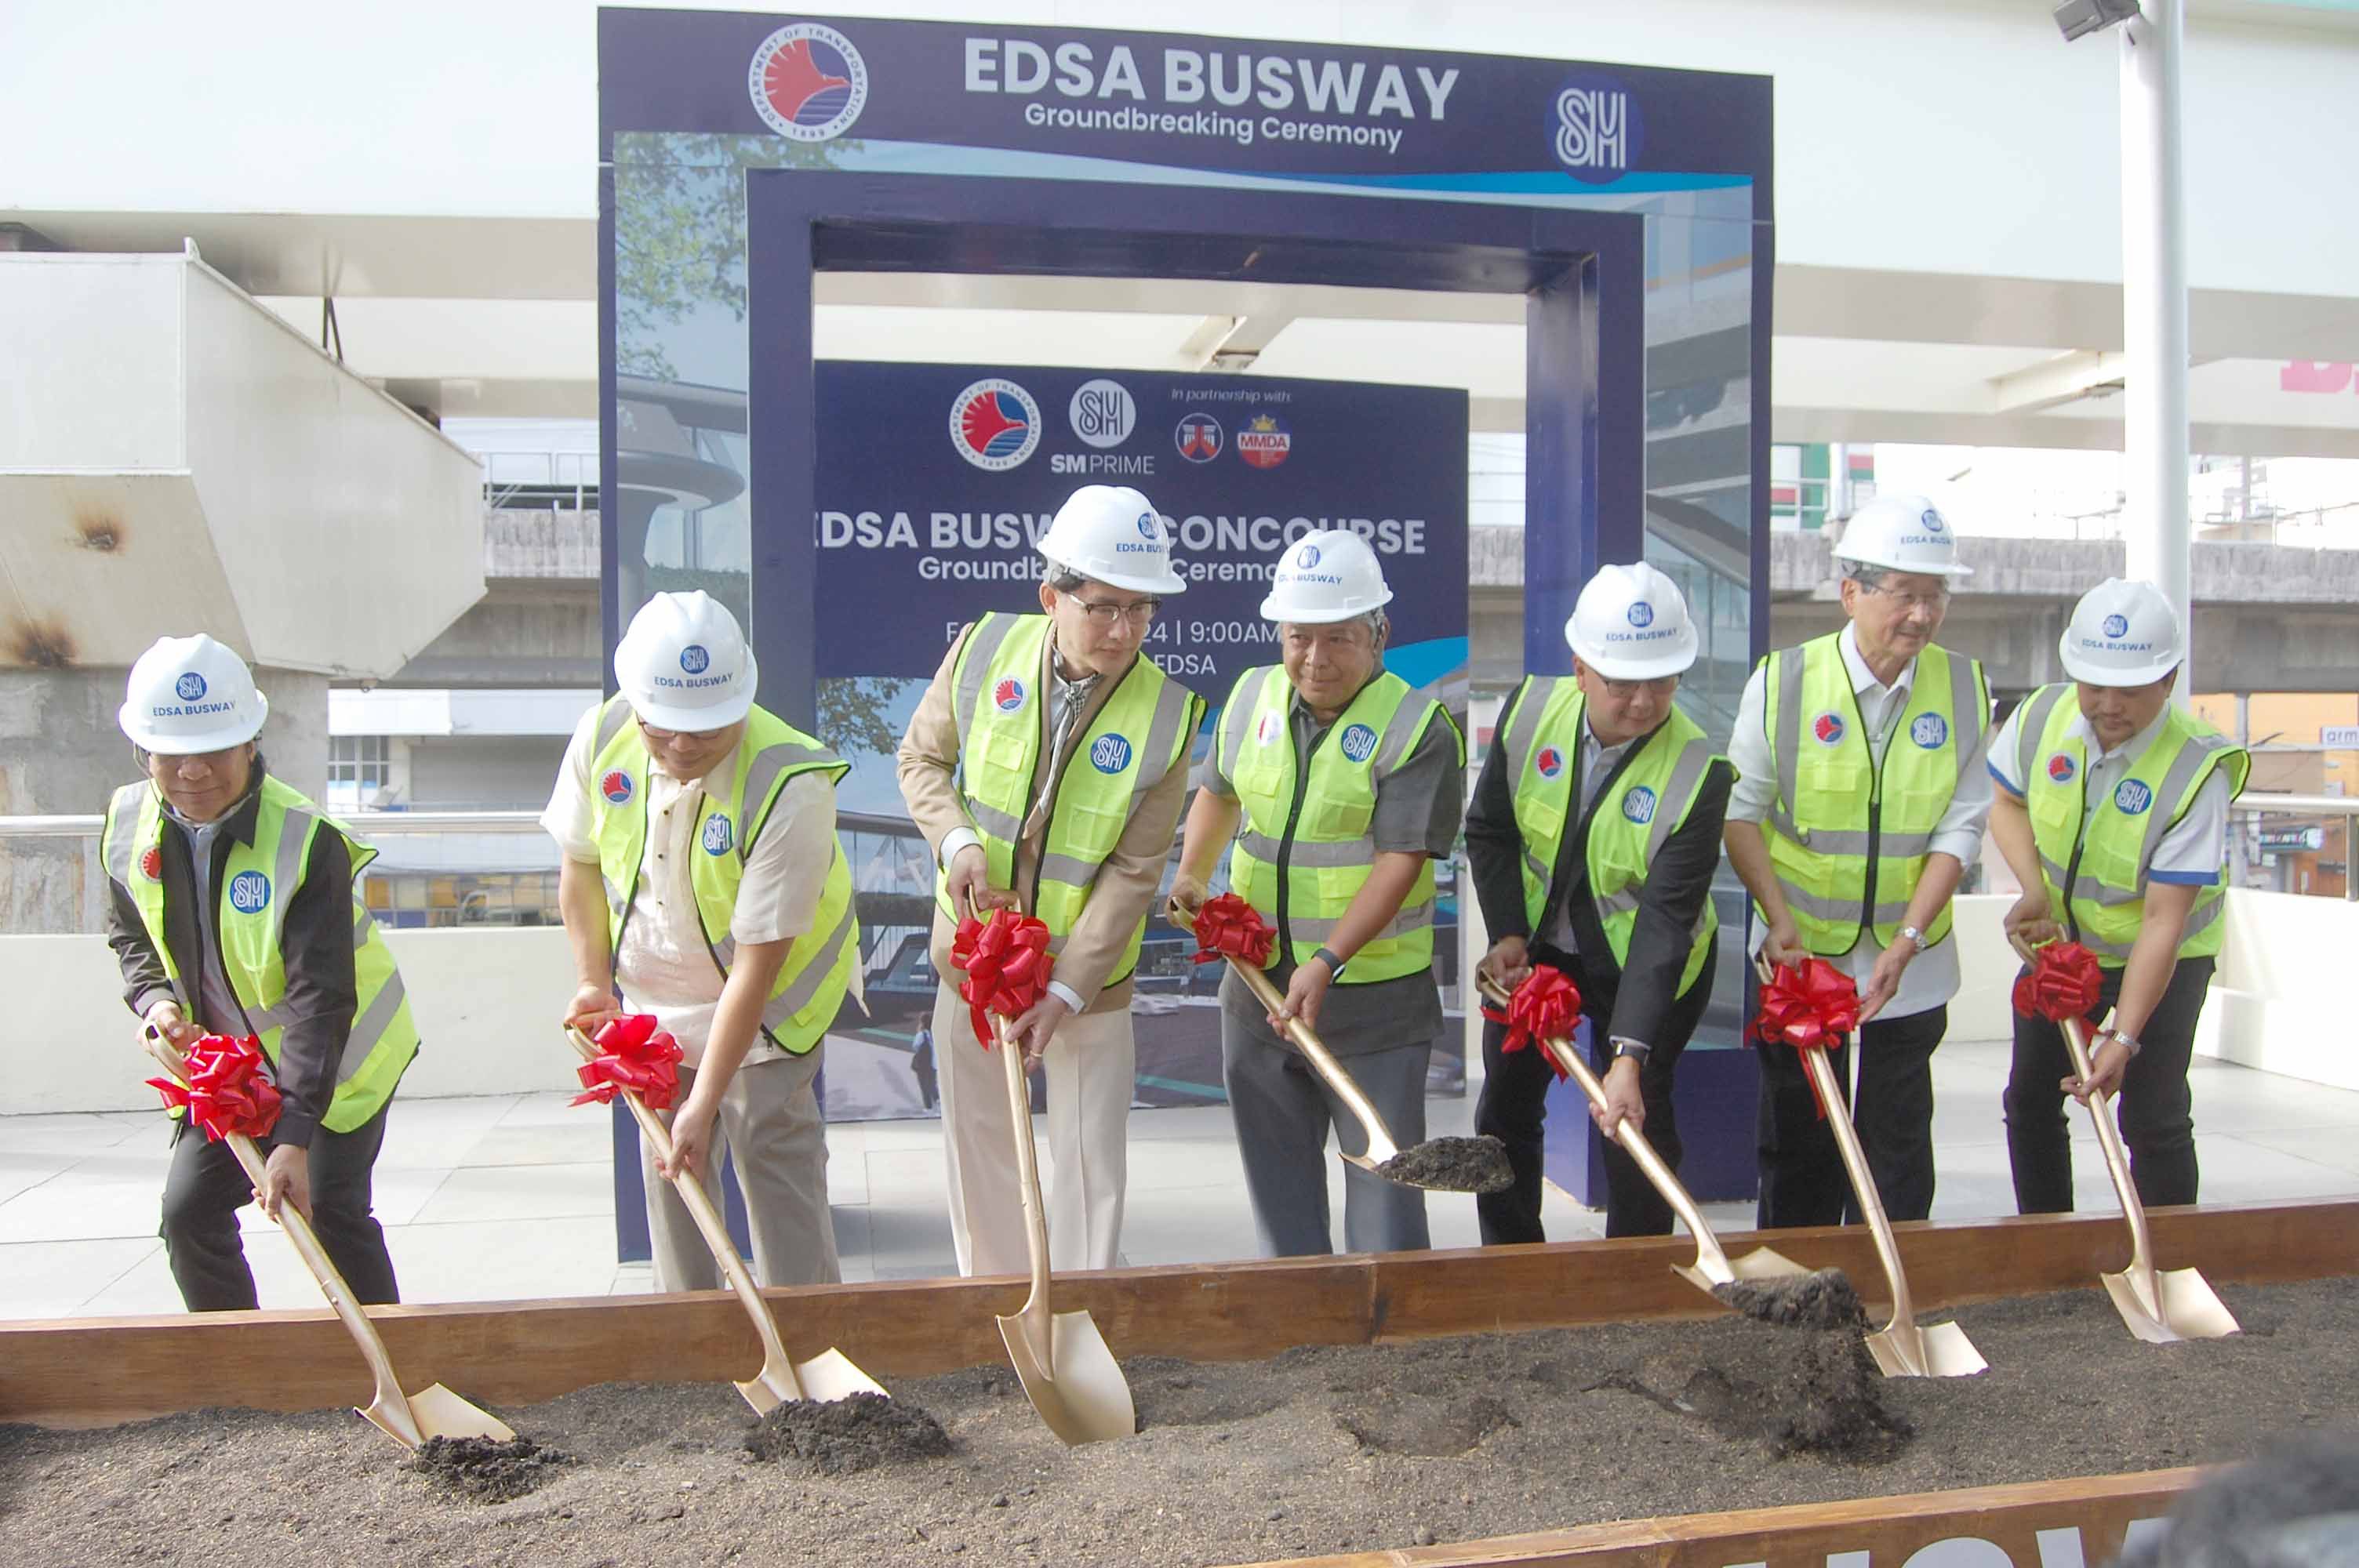 NEW EDSA BUSWAY CONCOURSE